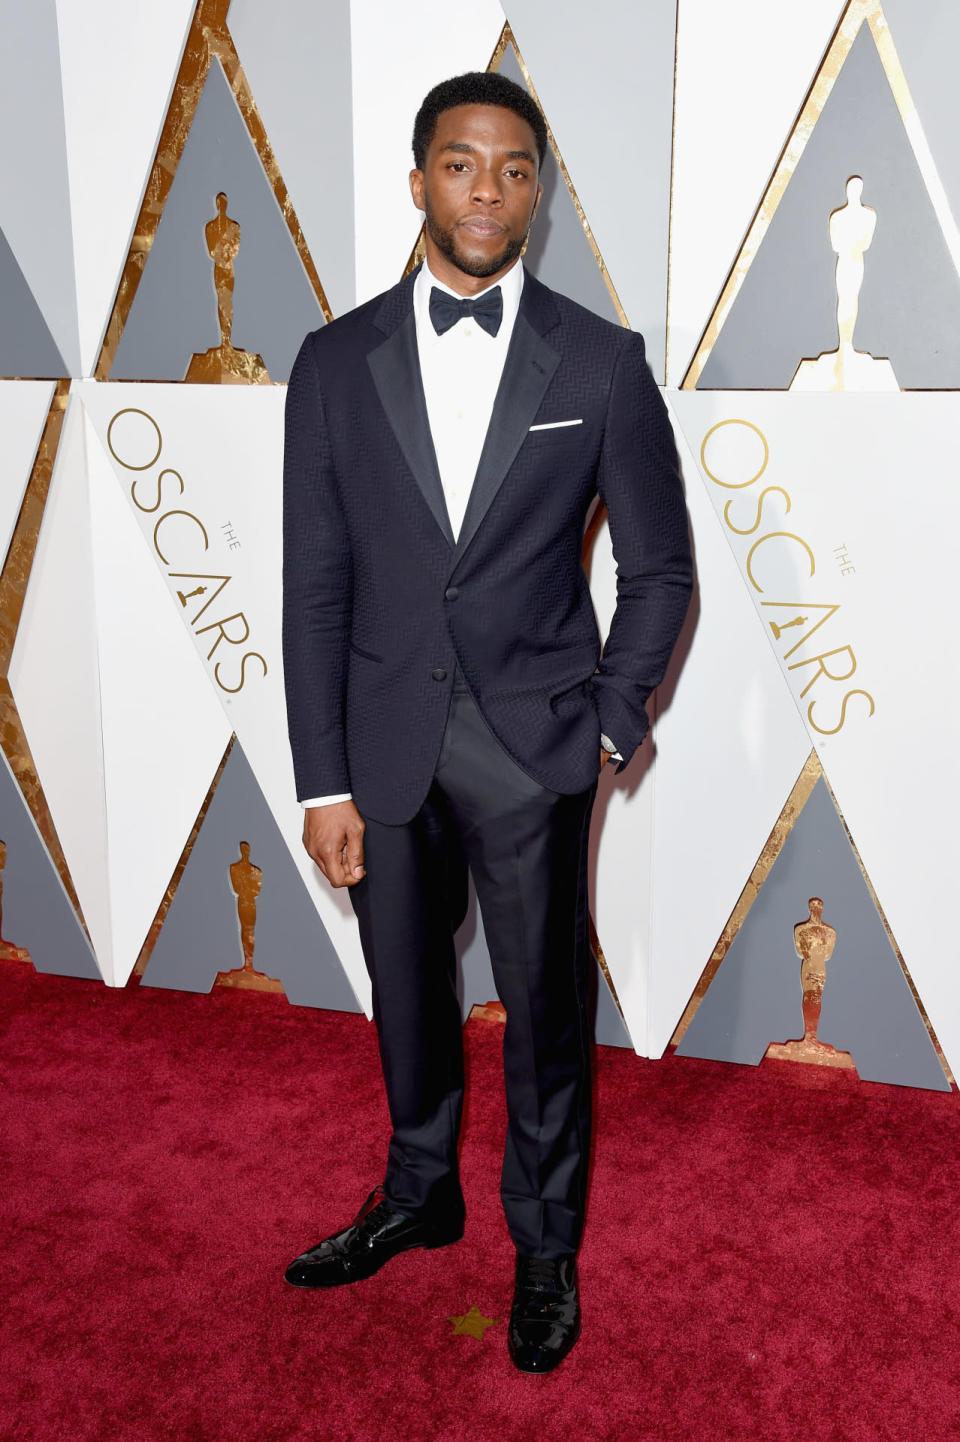 Best: Chadwick Bozeman in a navy blue tuxedo with black lapels at the 88th Academy Awards on Feb. 28, 2016, in Hollywood, California.